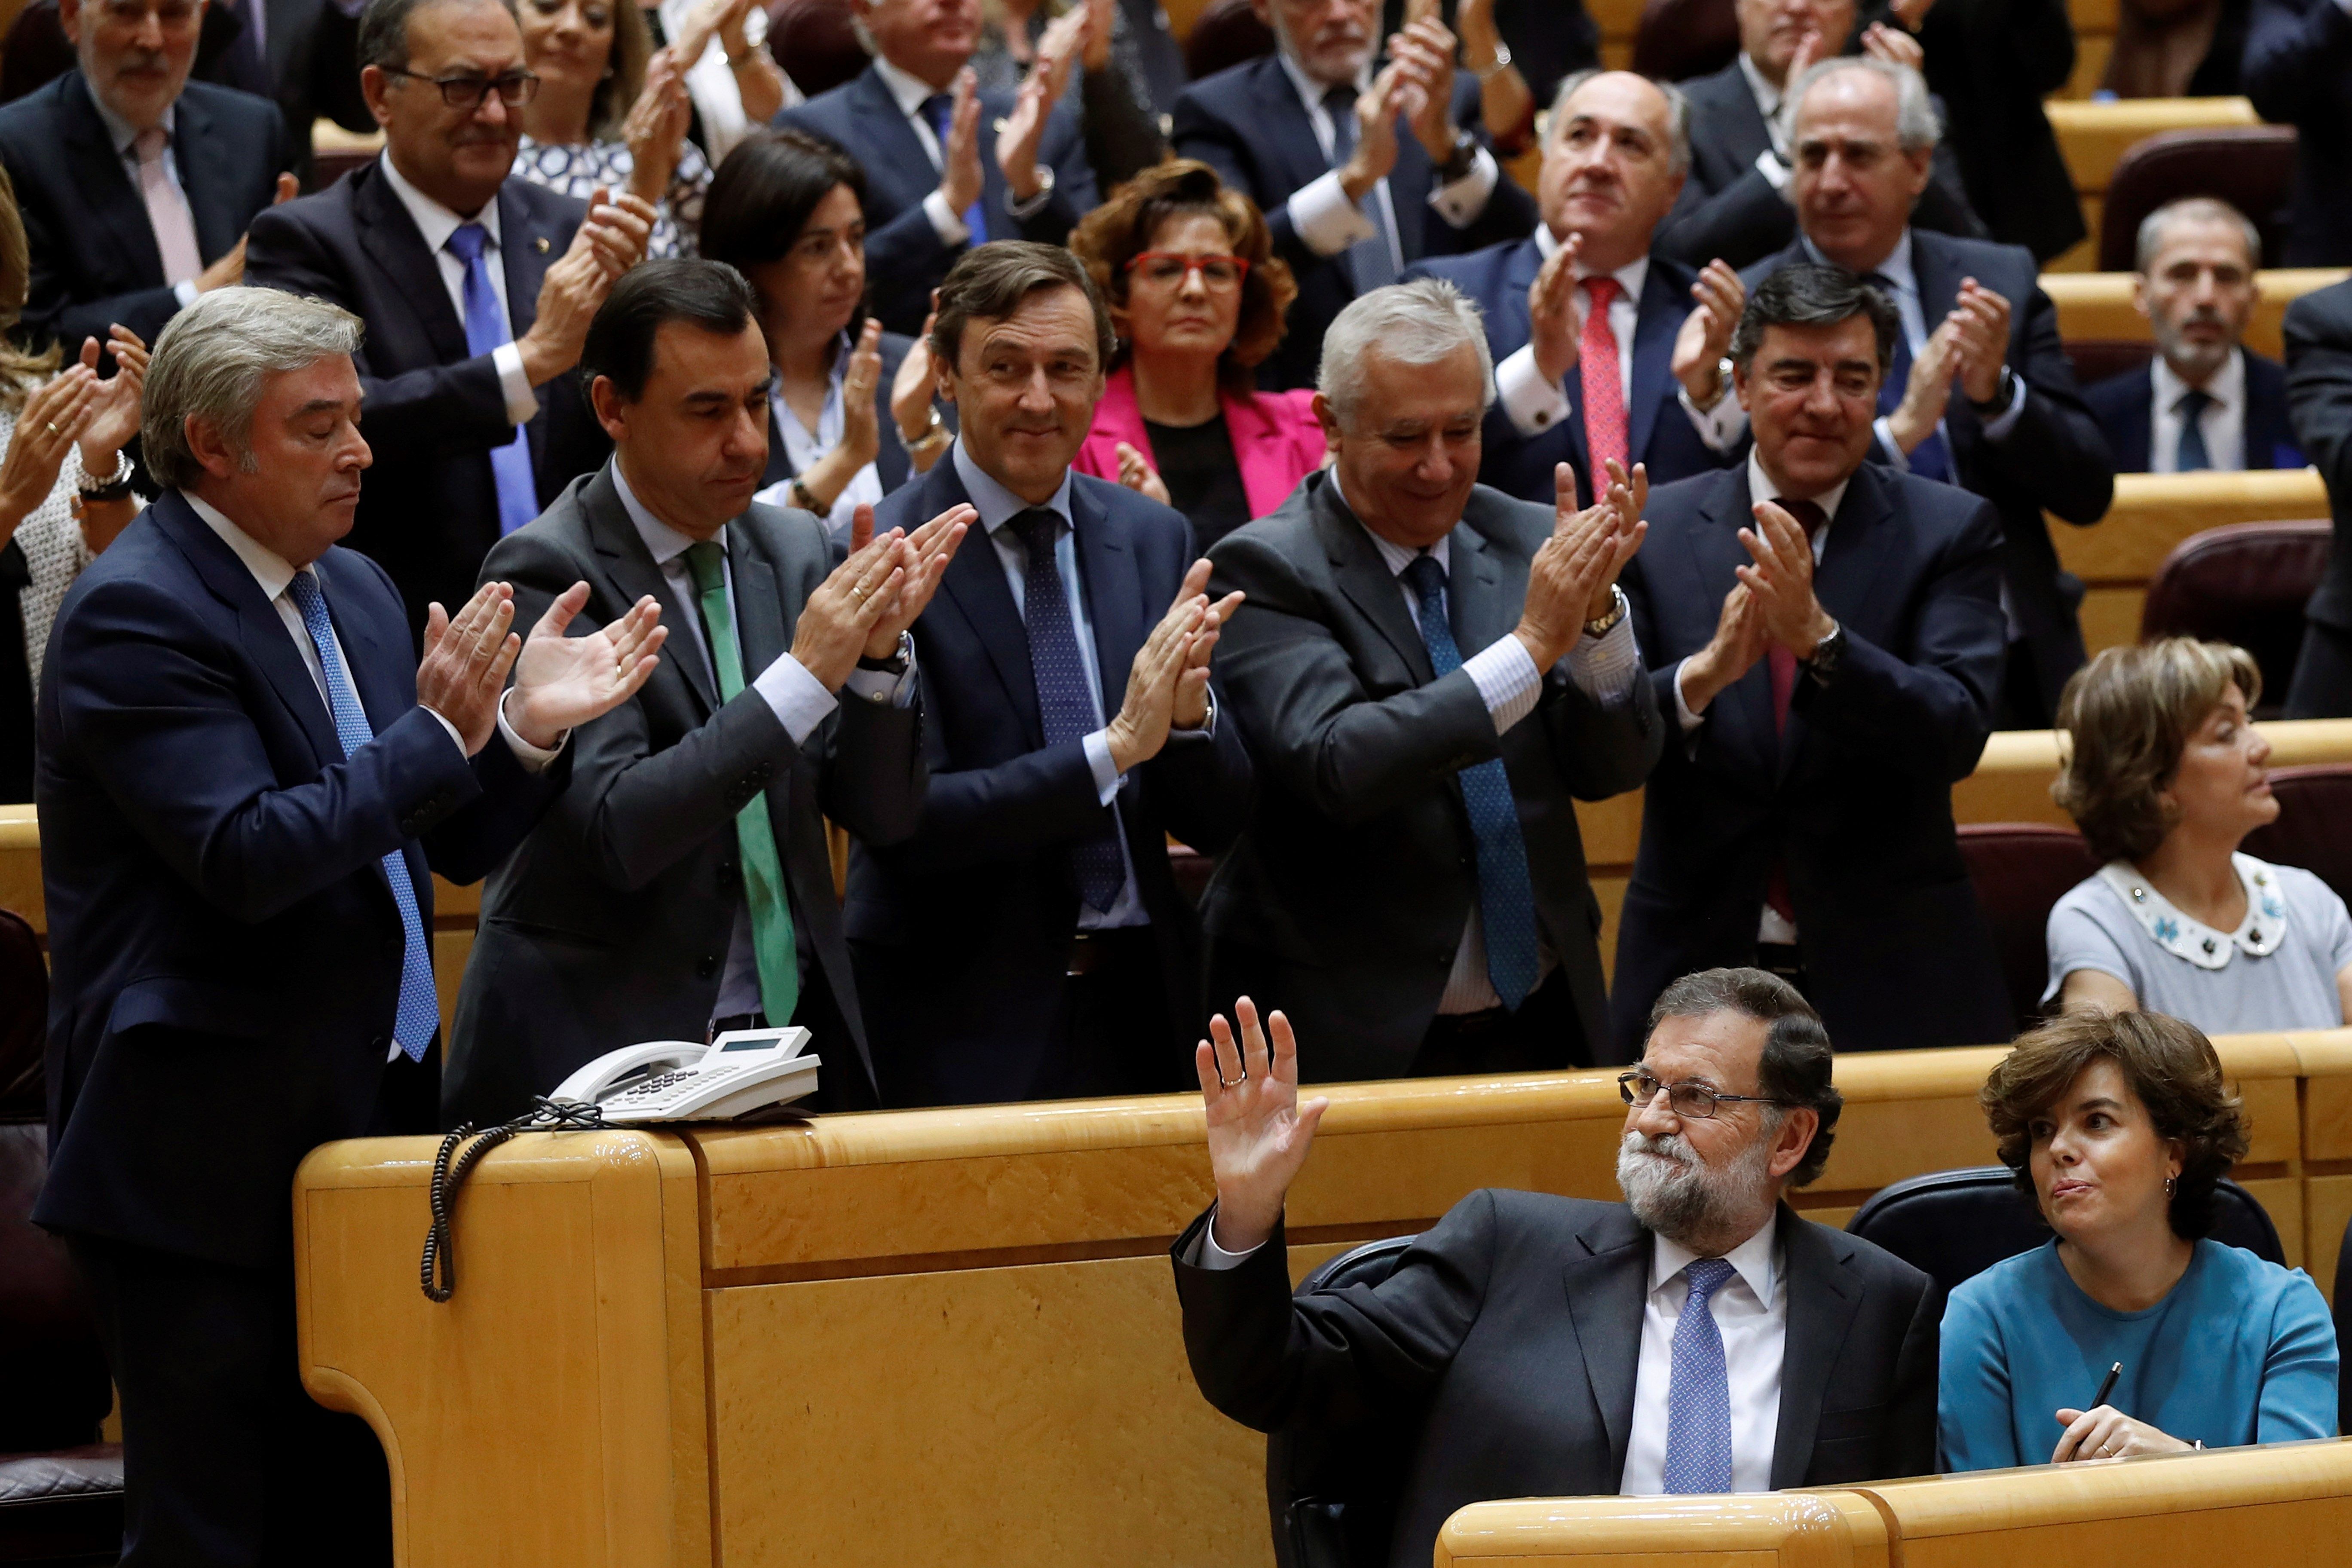 Alliance of parties imposes itself in the Spanish Senate to suspend Catalan self-government